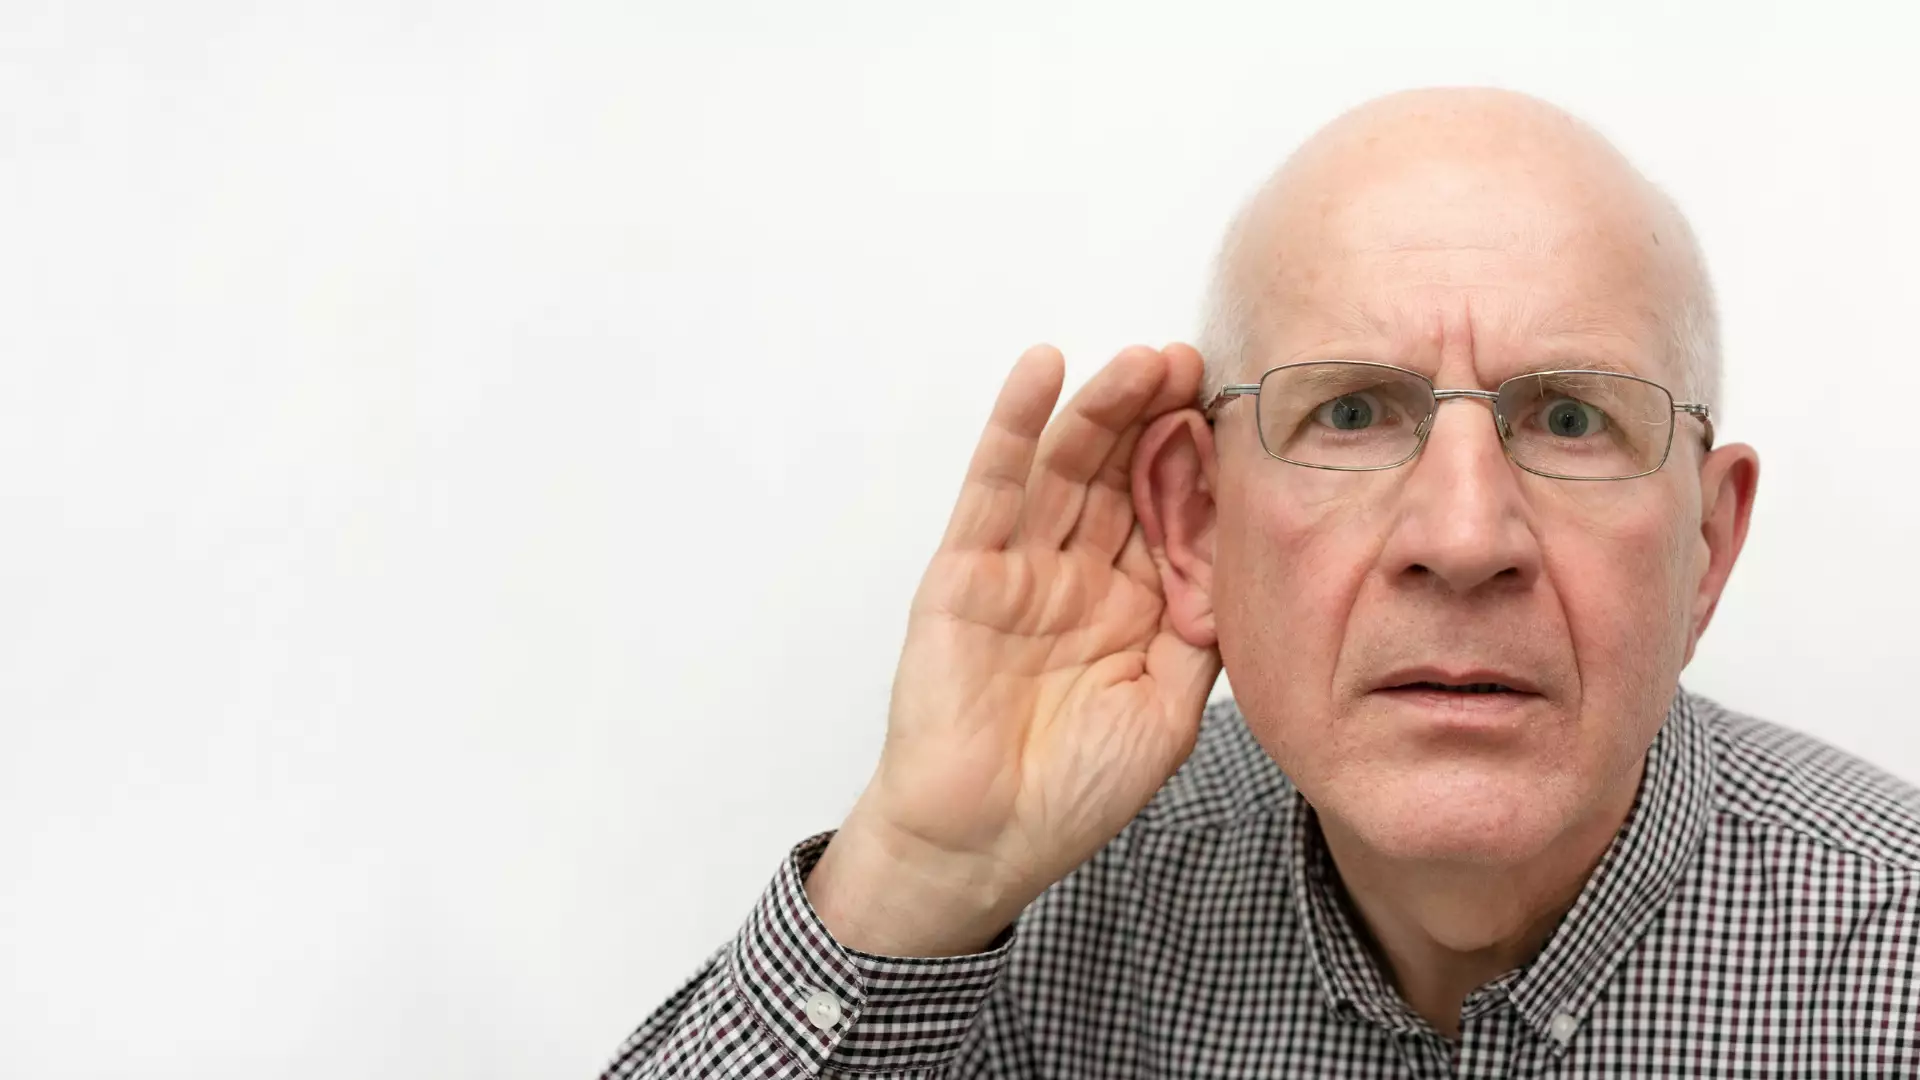 Symptoms of Hearing Loss and Treatment Methods